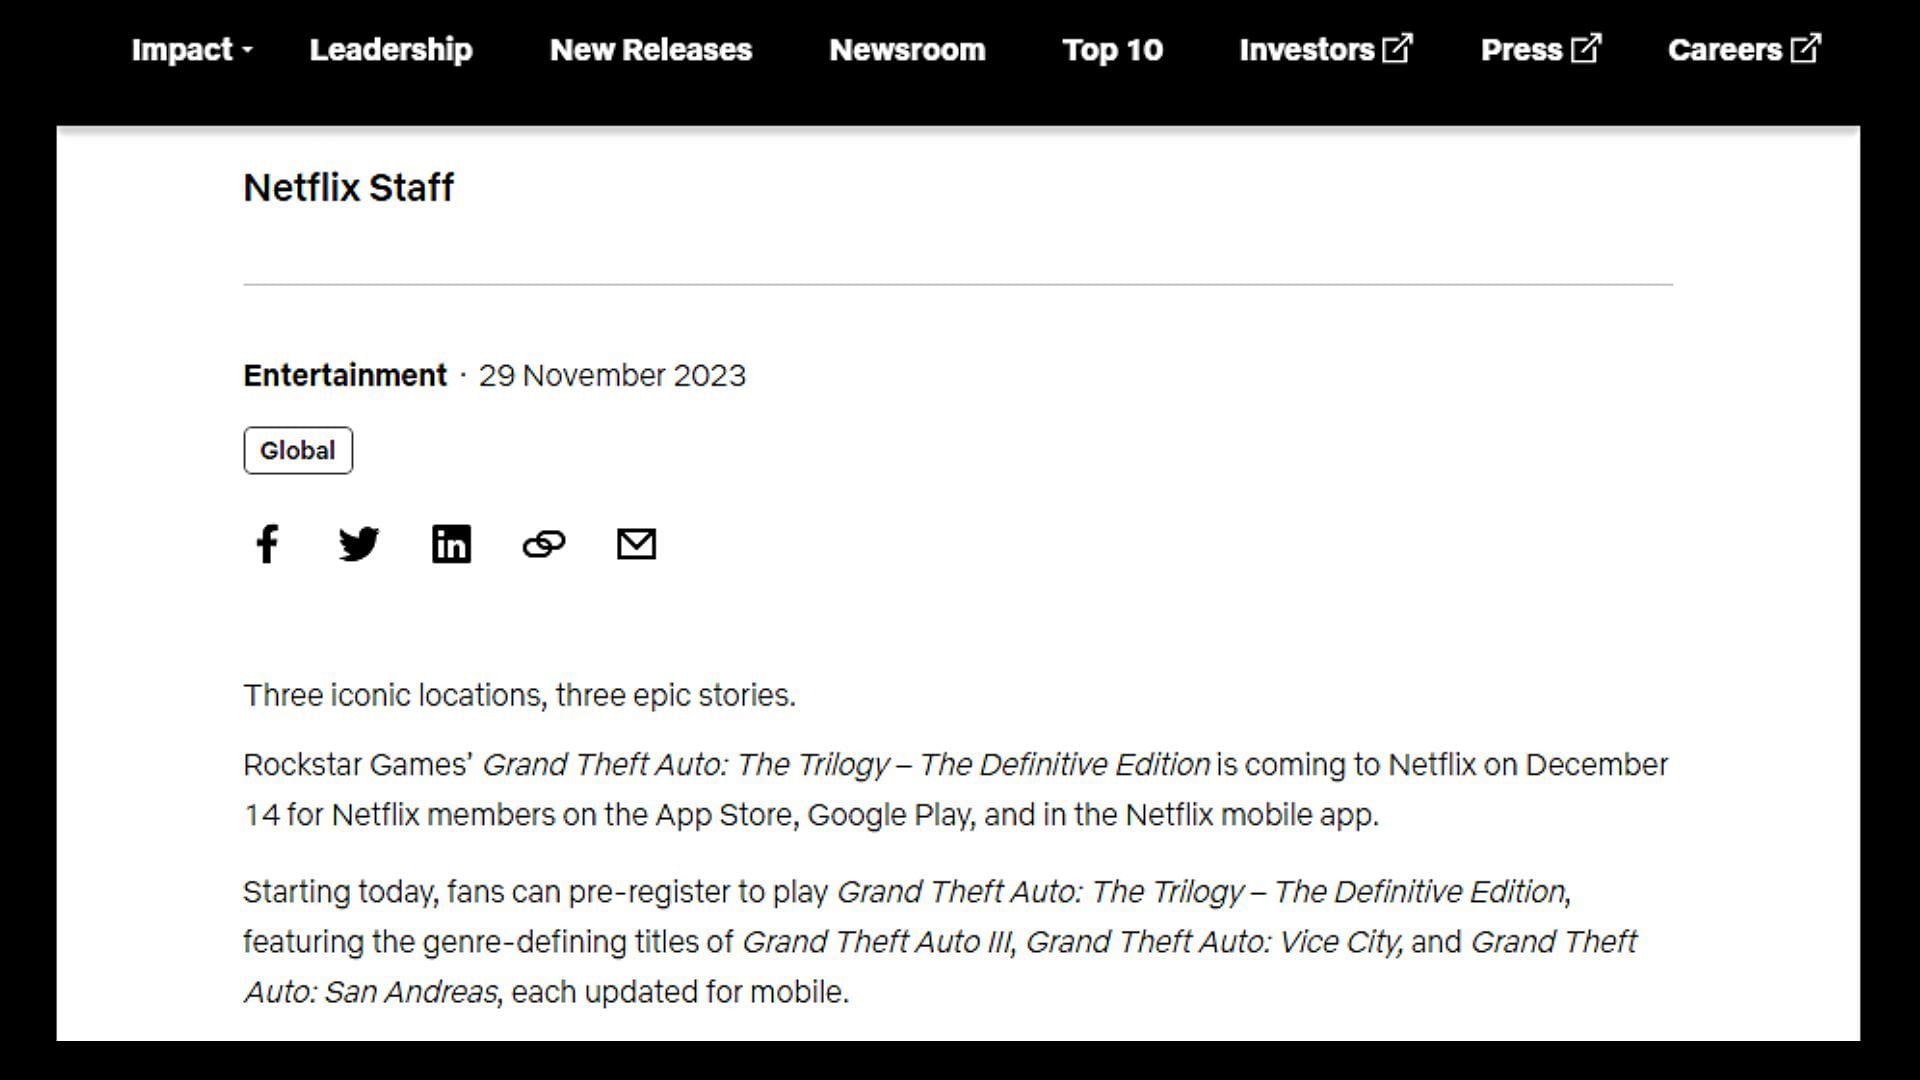 Grand Theft Auto Trilogy Definitive Edition to release on Netflix soon (Image via about.netflix.com)